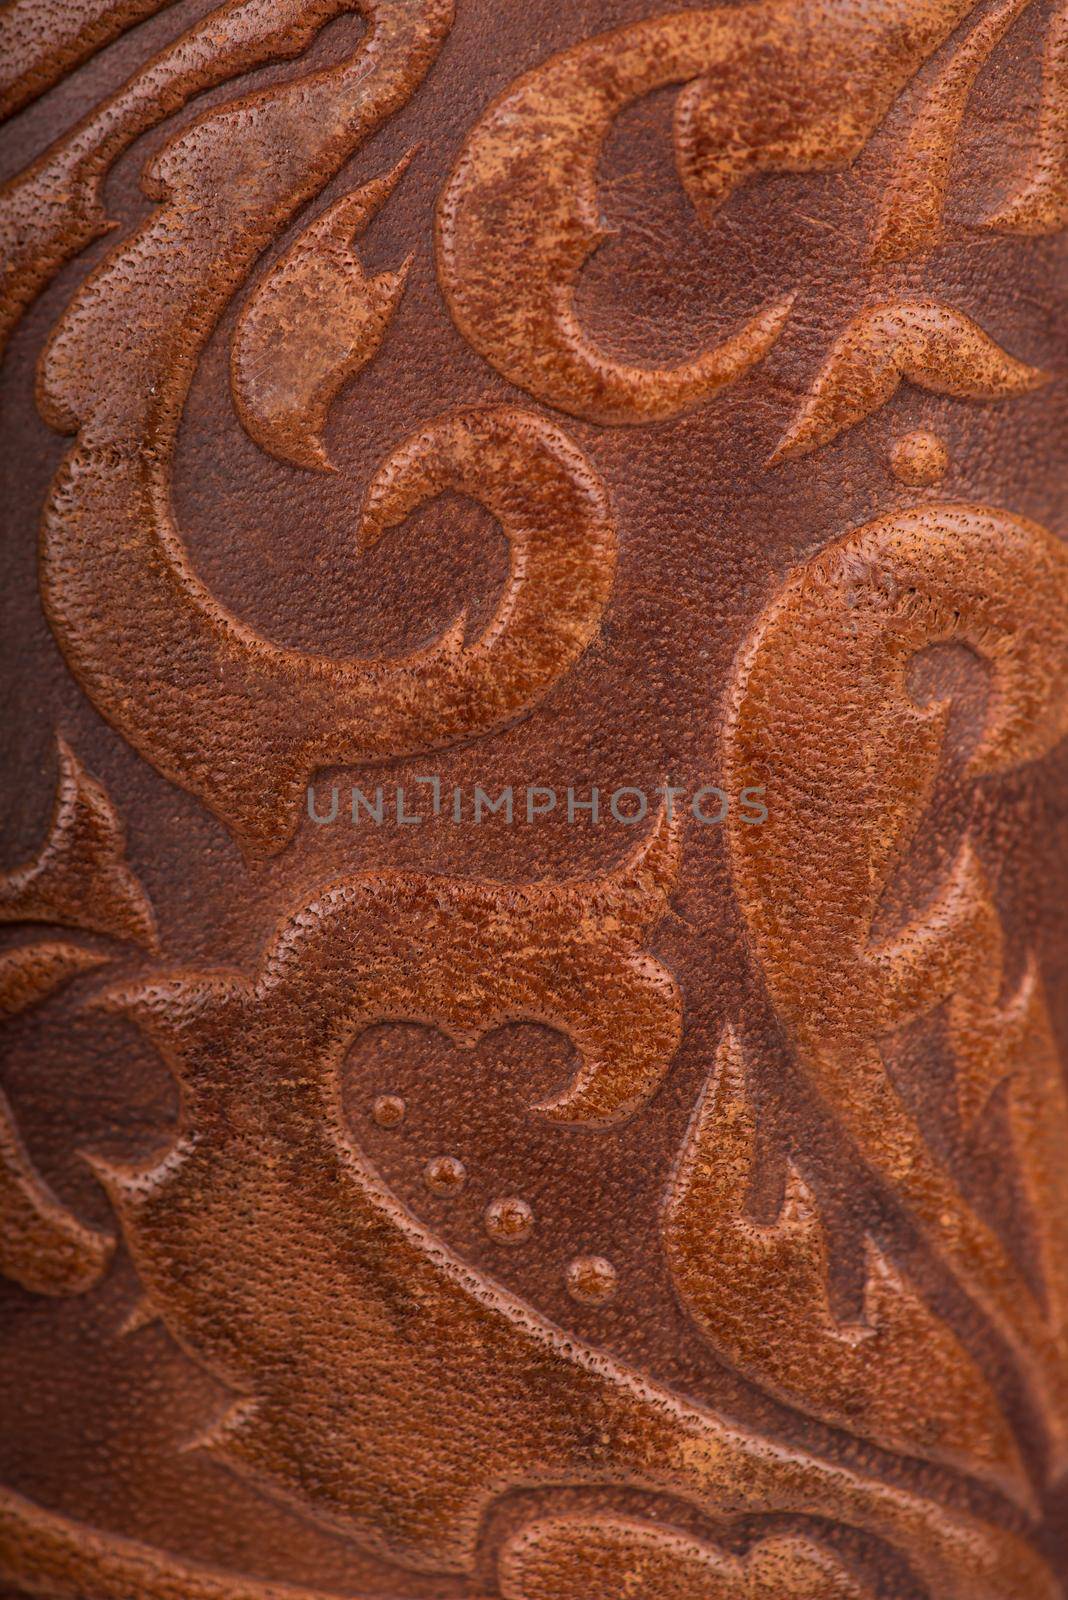 The Leather floral pattern background close up